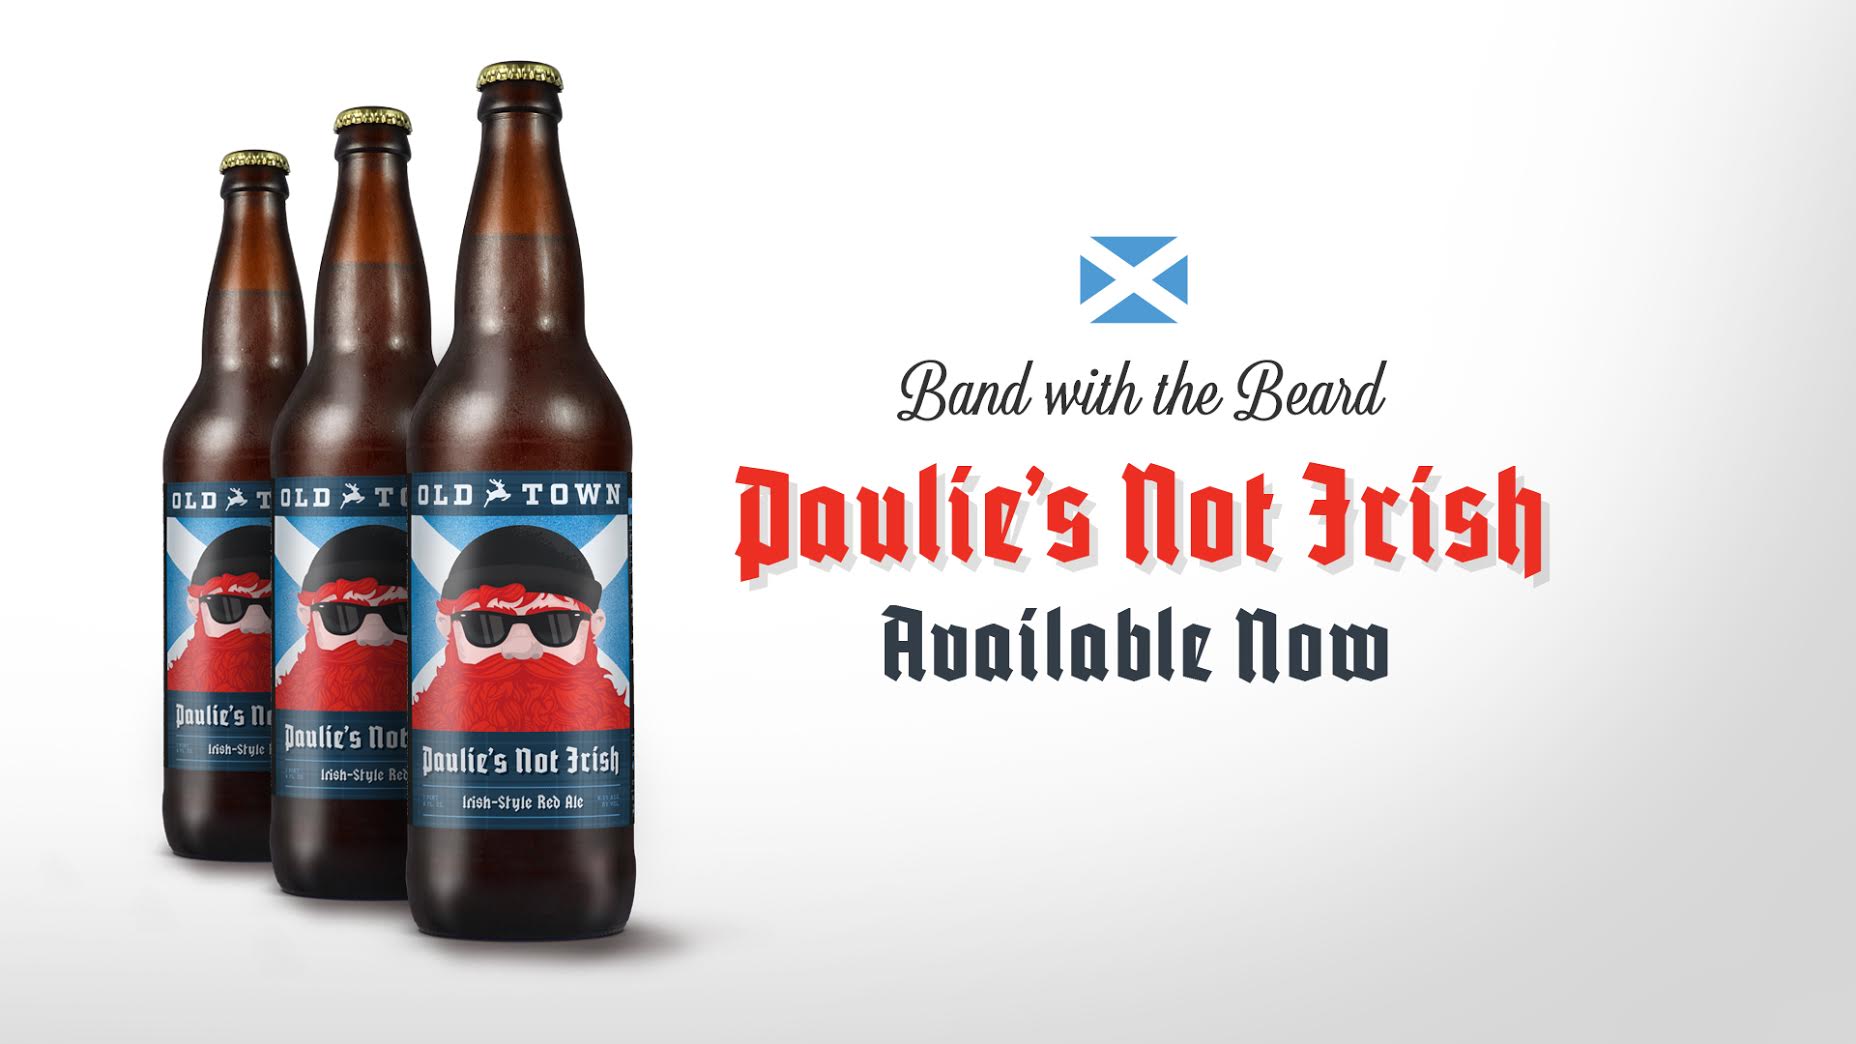 old-town-brewing-paulies-not-irish-red-ale-banner